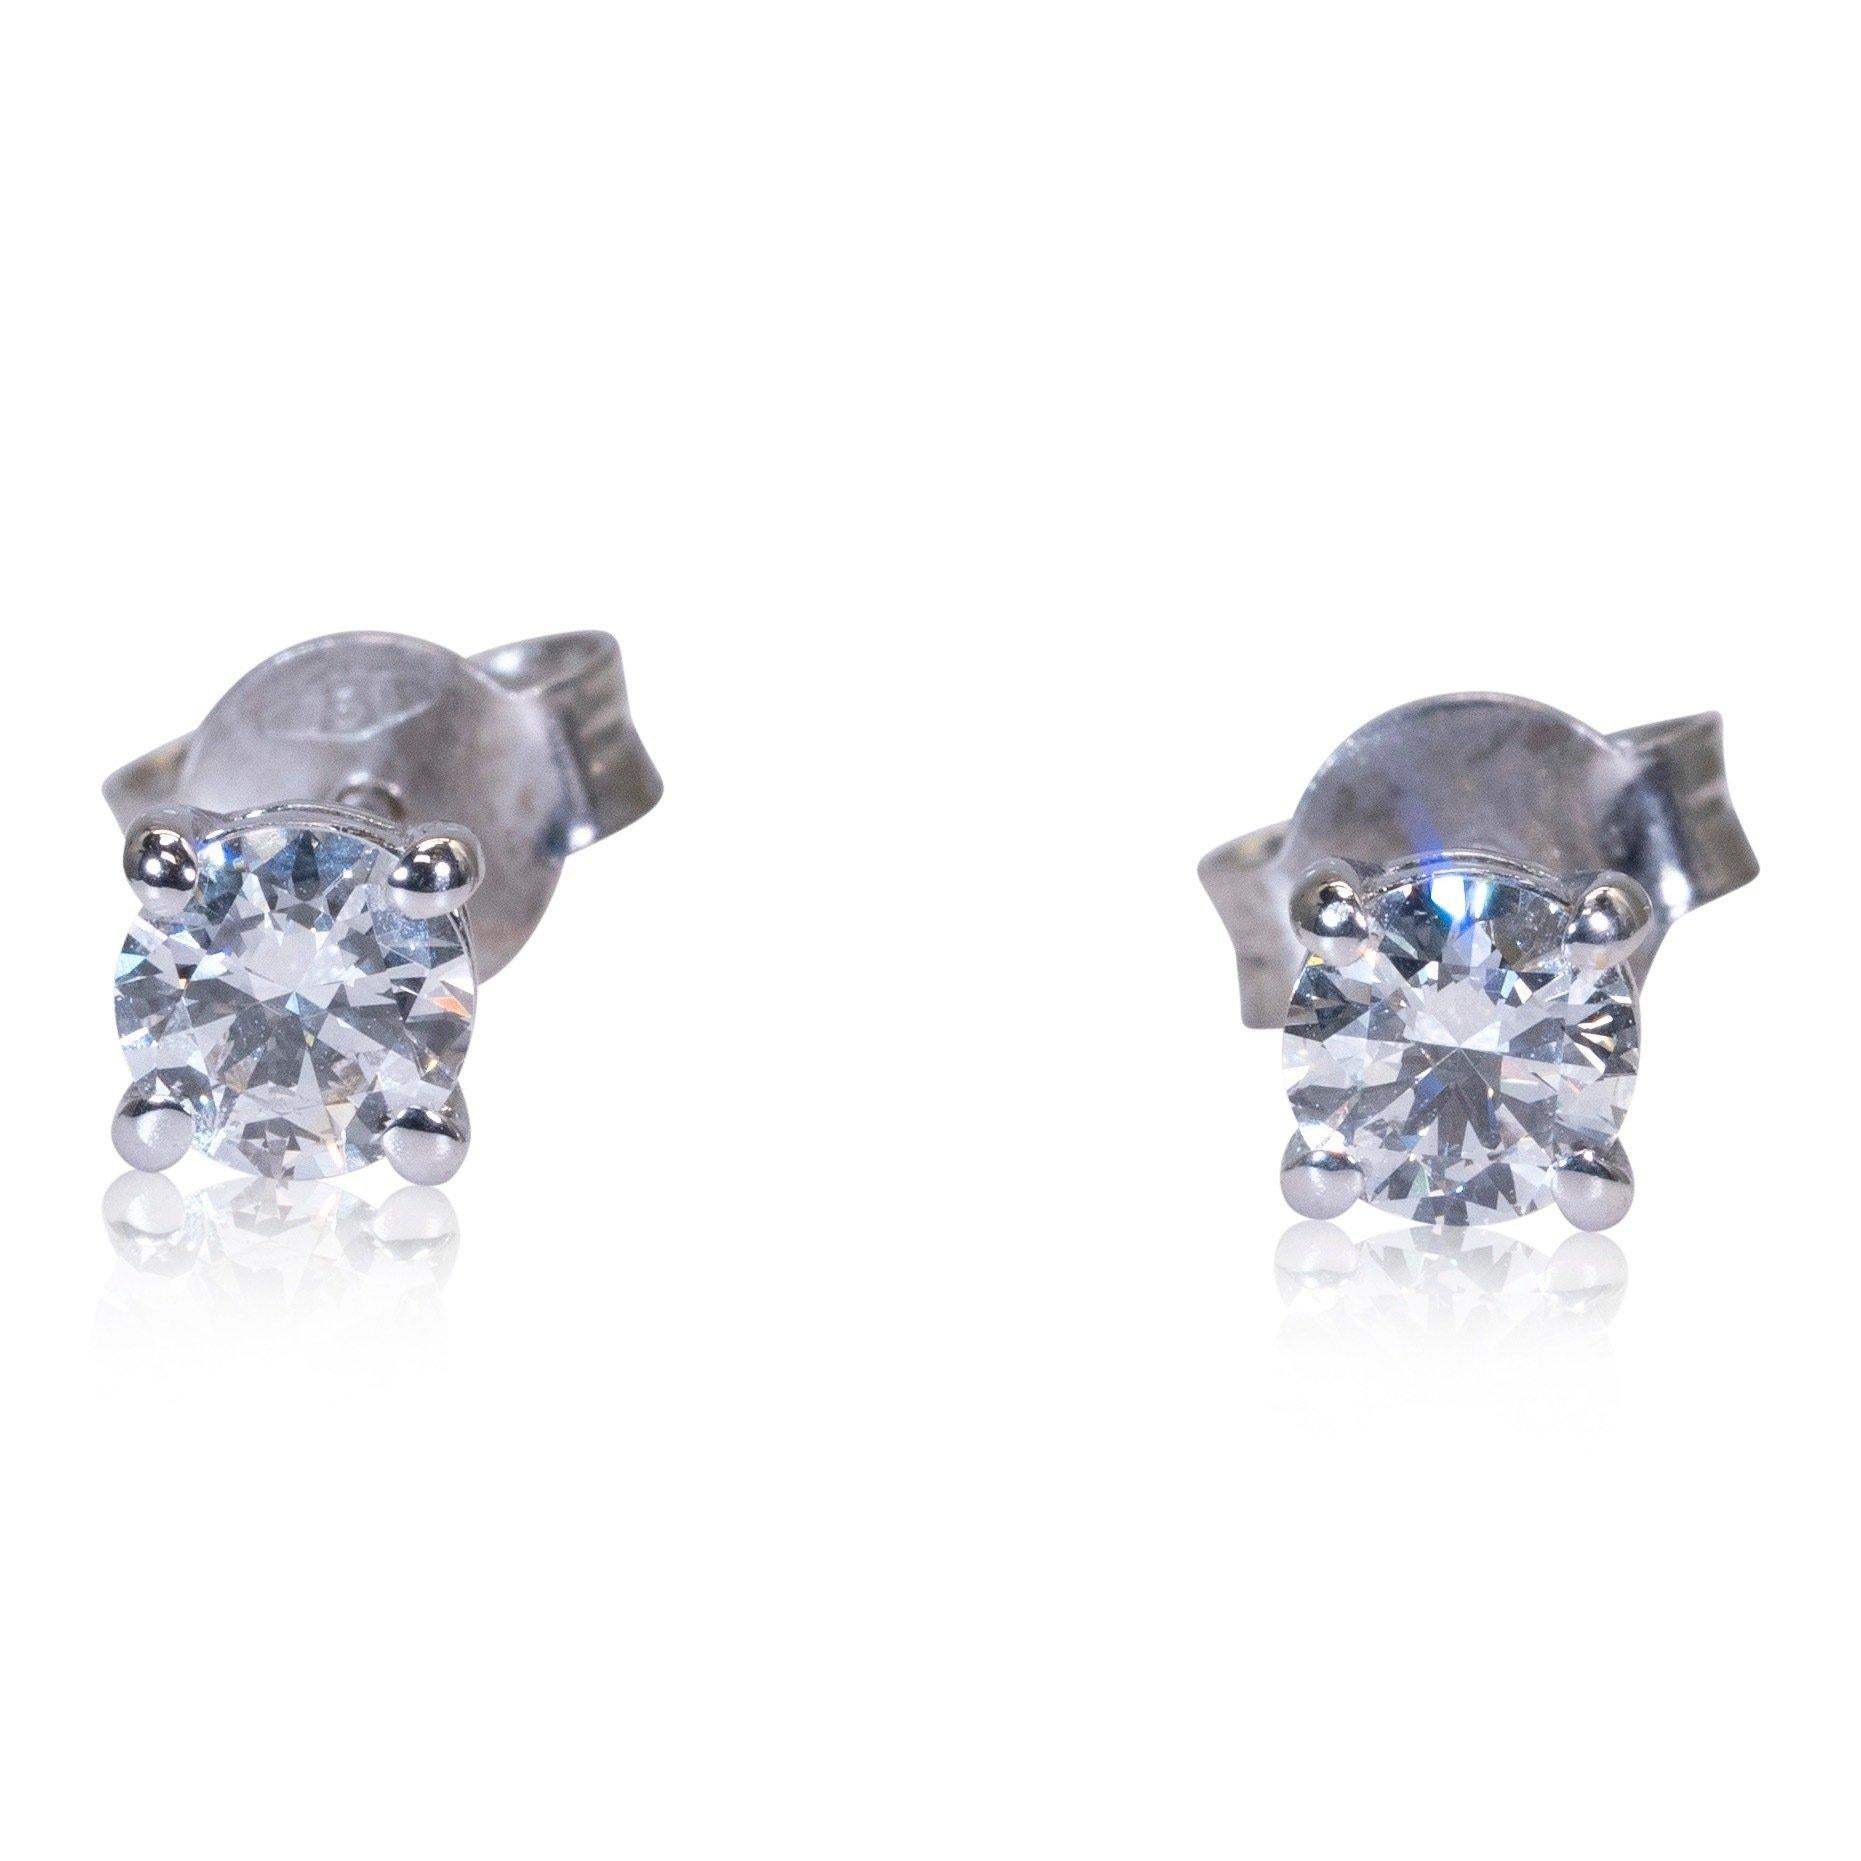 Sparkling 18K White Gold Stud Earrings with 0.31 ct Natural Diamonds, GIA Cert For Sale 3